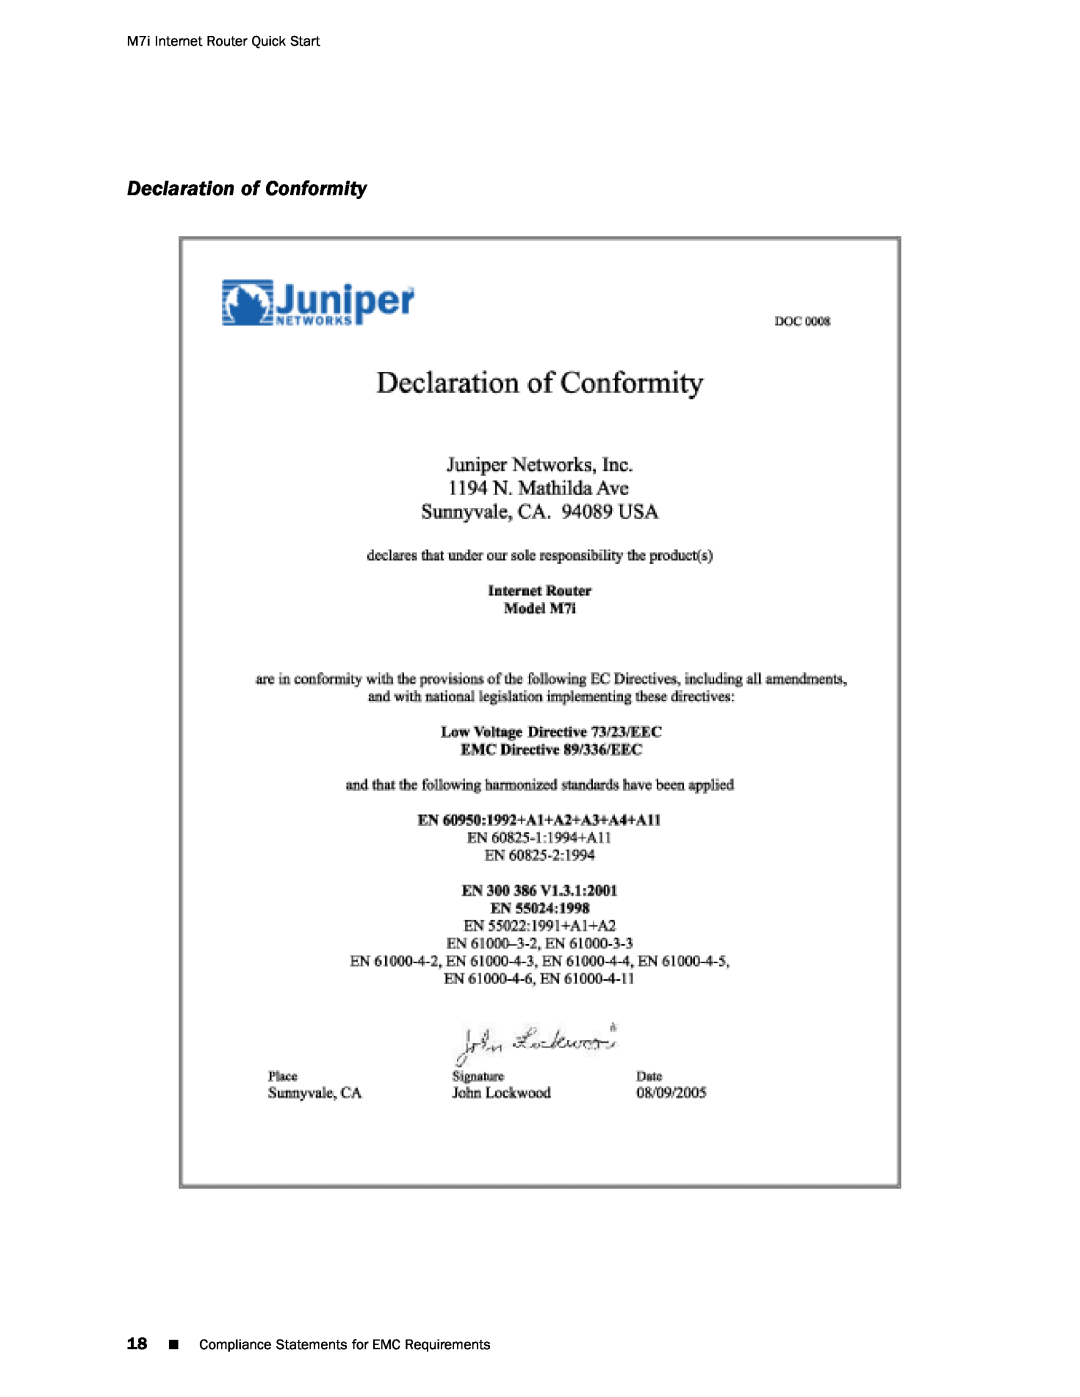 Juniper Networks Declaration of Conformity, M7i Internet Router Quick Start, Compliance Statements for EMC Requirements 